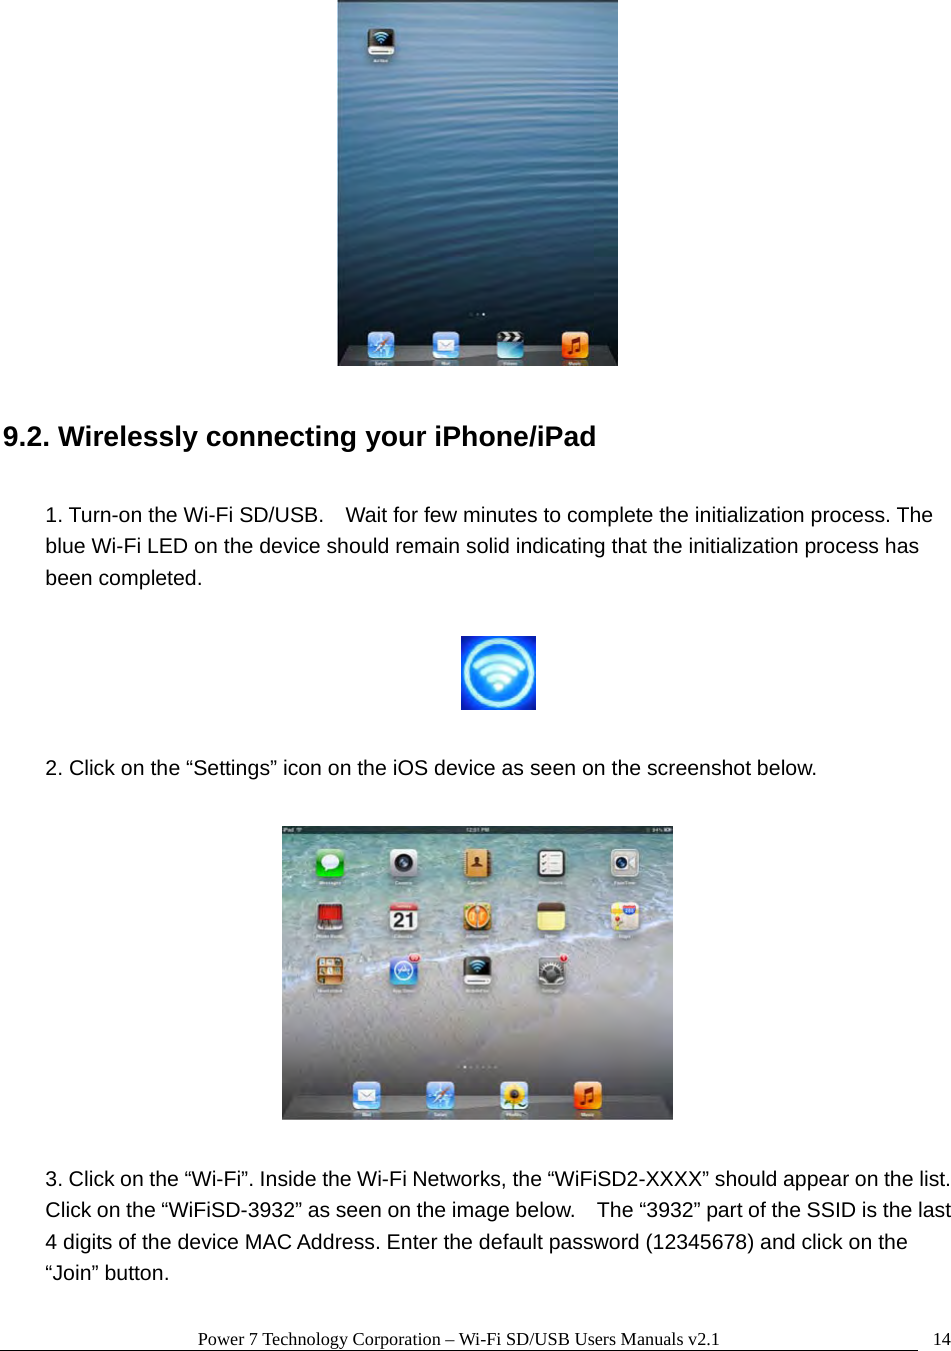 Power 7 Technology Corporation – Wi-Fi SD/USB Users Manuals v2.1  14  9.2. Wirelessly connecting your iPhone/iPad  1. Turn-on the Wi-Fi SD/USB.    Wait for few minutes to complete the initialization process. The blue Wi-Fi LED on the device should remain solid indicating that the initialization process has been completed.    2. Click on the “Settings” icon on the iOS device as seen on the screenshot below.    3. Click on the “Wi-Fi”. Inside the Wi-Fi Networks, the “WiFiSD2-XXXX” should appear on the list.   Click on the “WiFiSD-3932” as seen on the image below.    The “3932” part of the SSID is the last 4 digits of the device MAC Address. Enter the default password (12345678) and click on the “Join” button. 